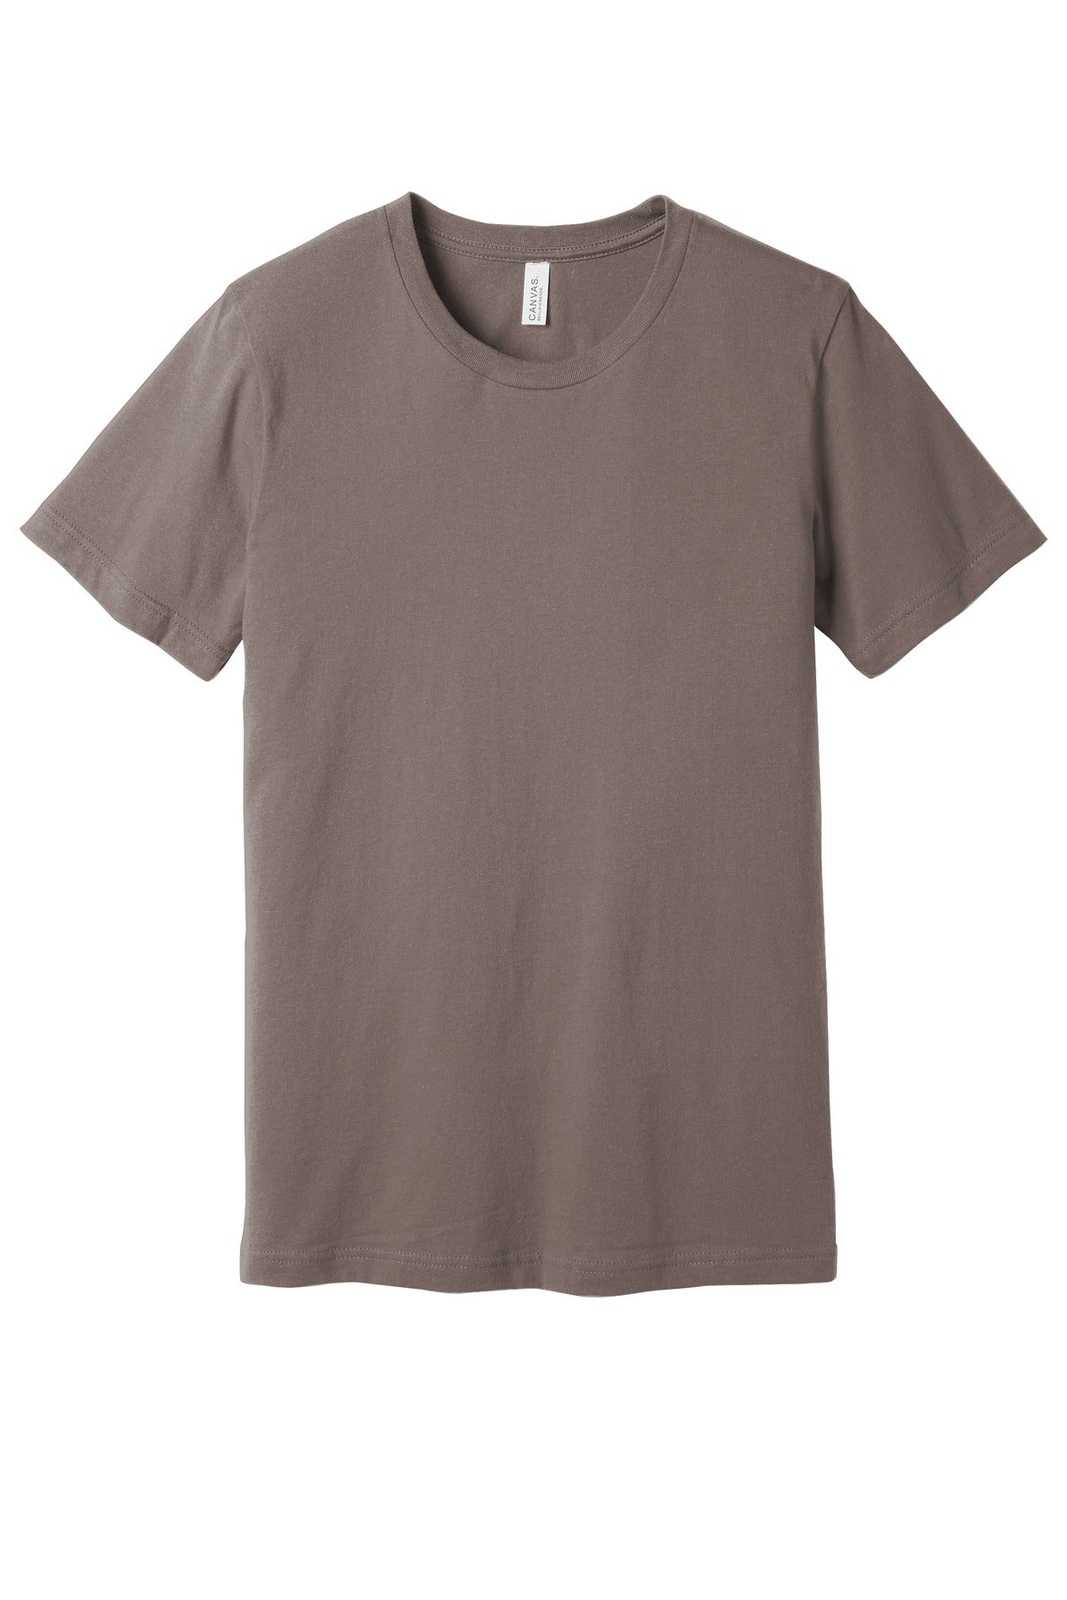 Bella + Canvas 3001 Unisex Jersey Short Sleeve Tee - Pebble Brown - HIT a Double